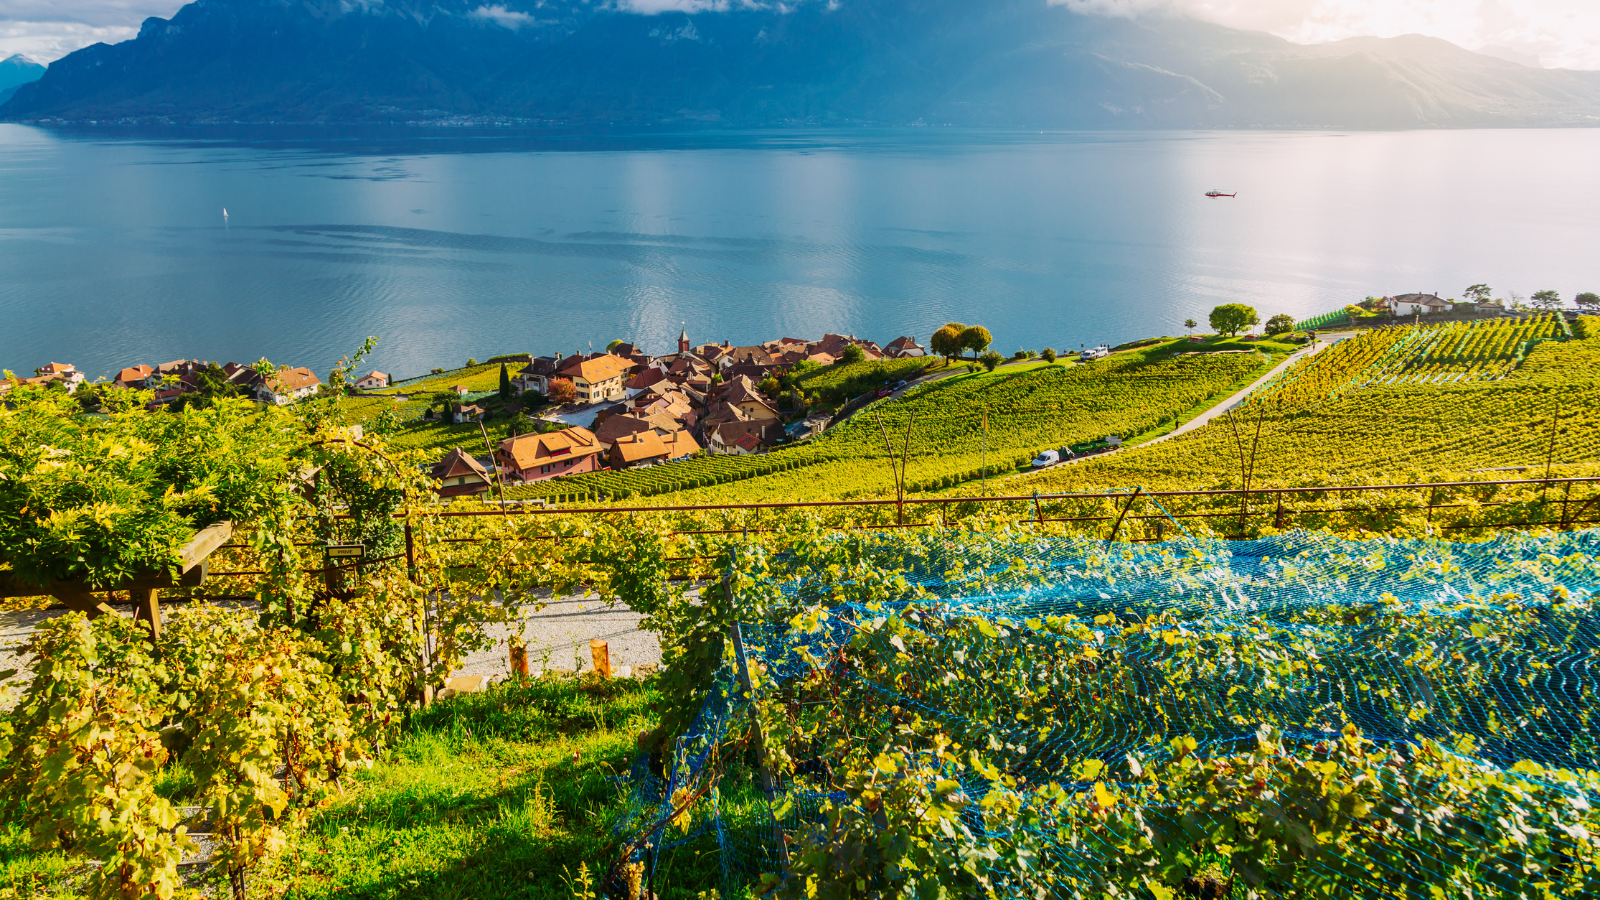 The seventh thing in the list of 10 best things to do in Switzerland - Explore the Swiss Riviera